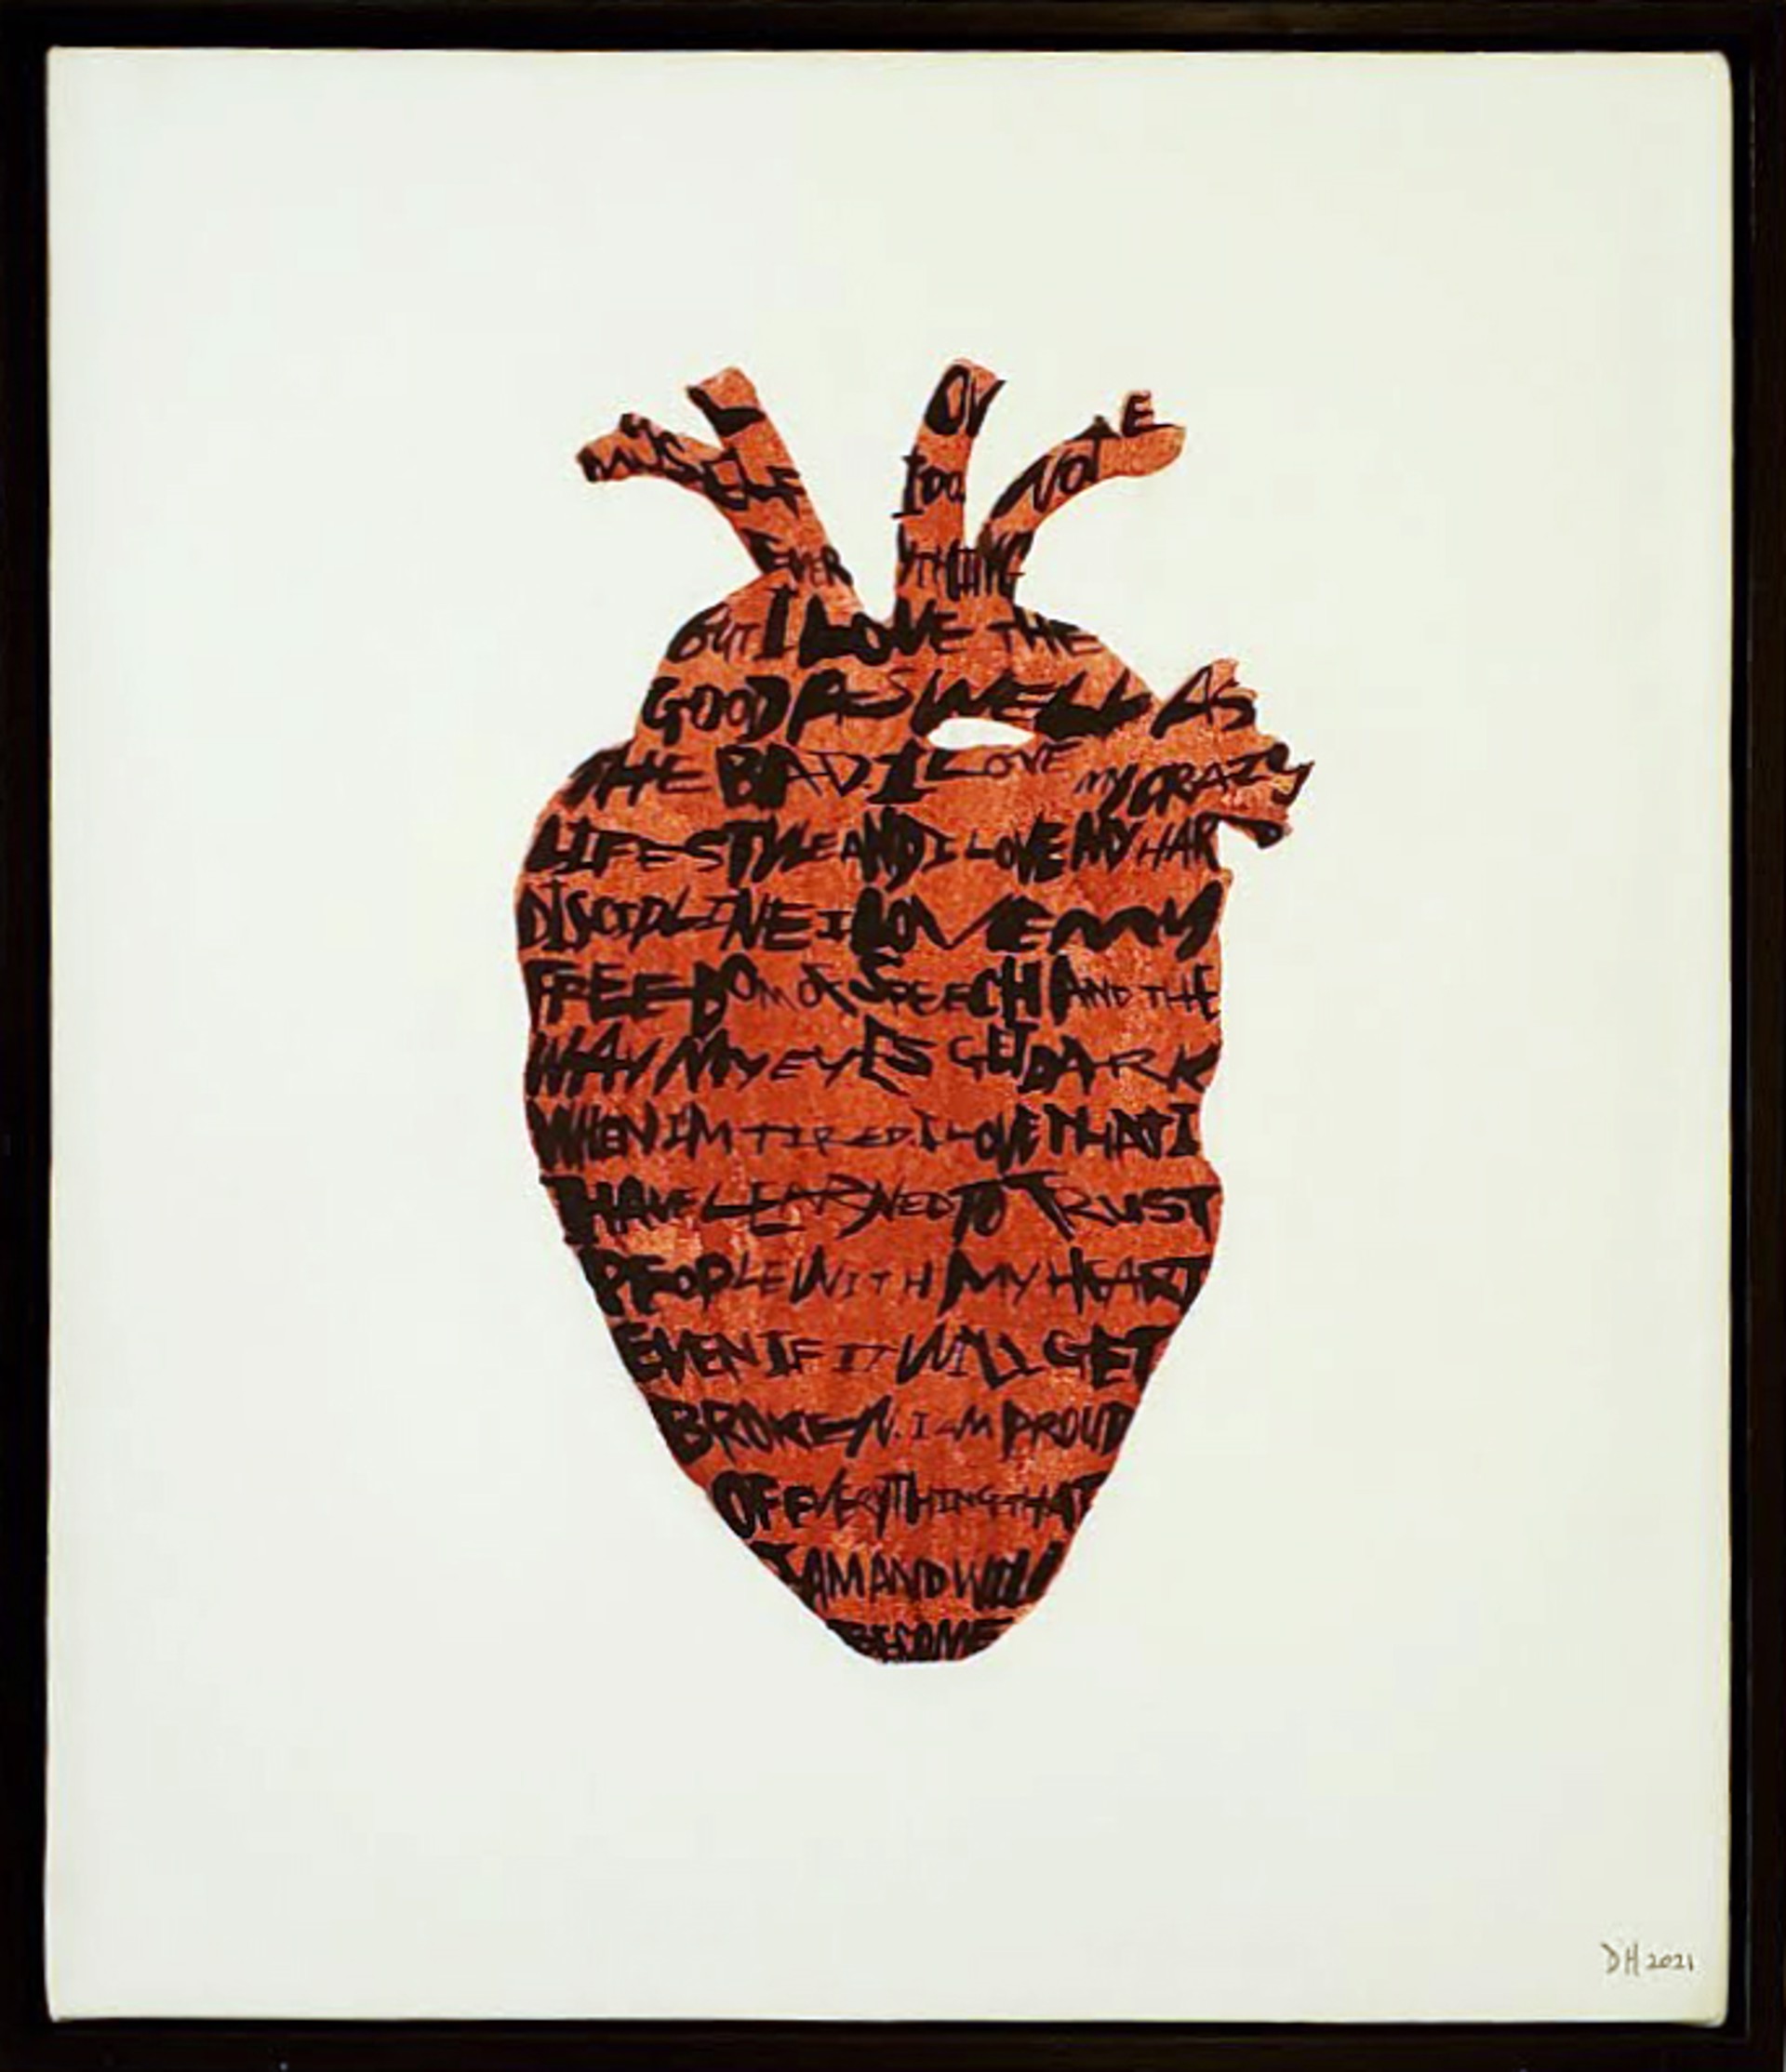 Johnny's Heart (Text: Johnny Weir) by David Hollier